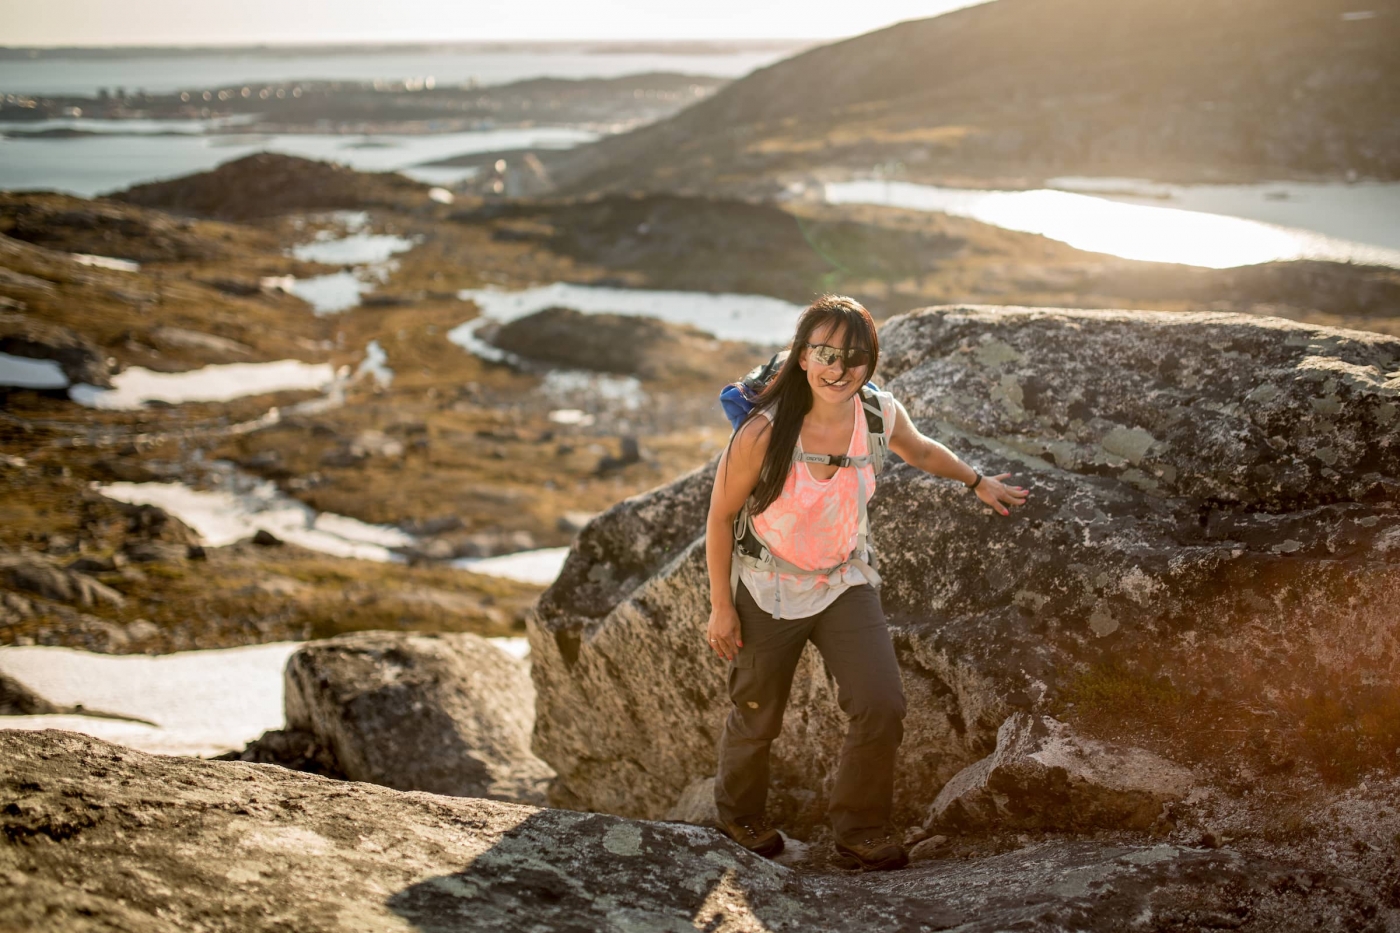 A hiker on the first part of the climb to the Ukkusissaq - Store Malene peak outside Nuuk in Greenland. Photo - Mads Pihl